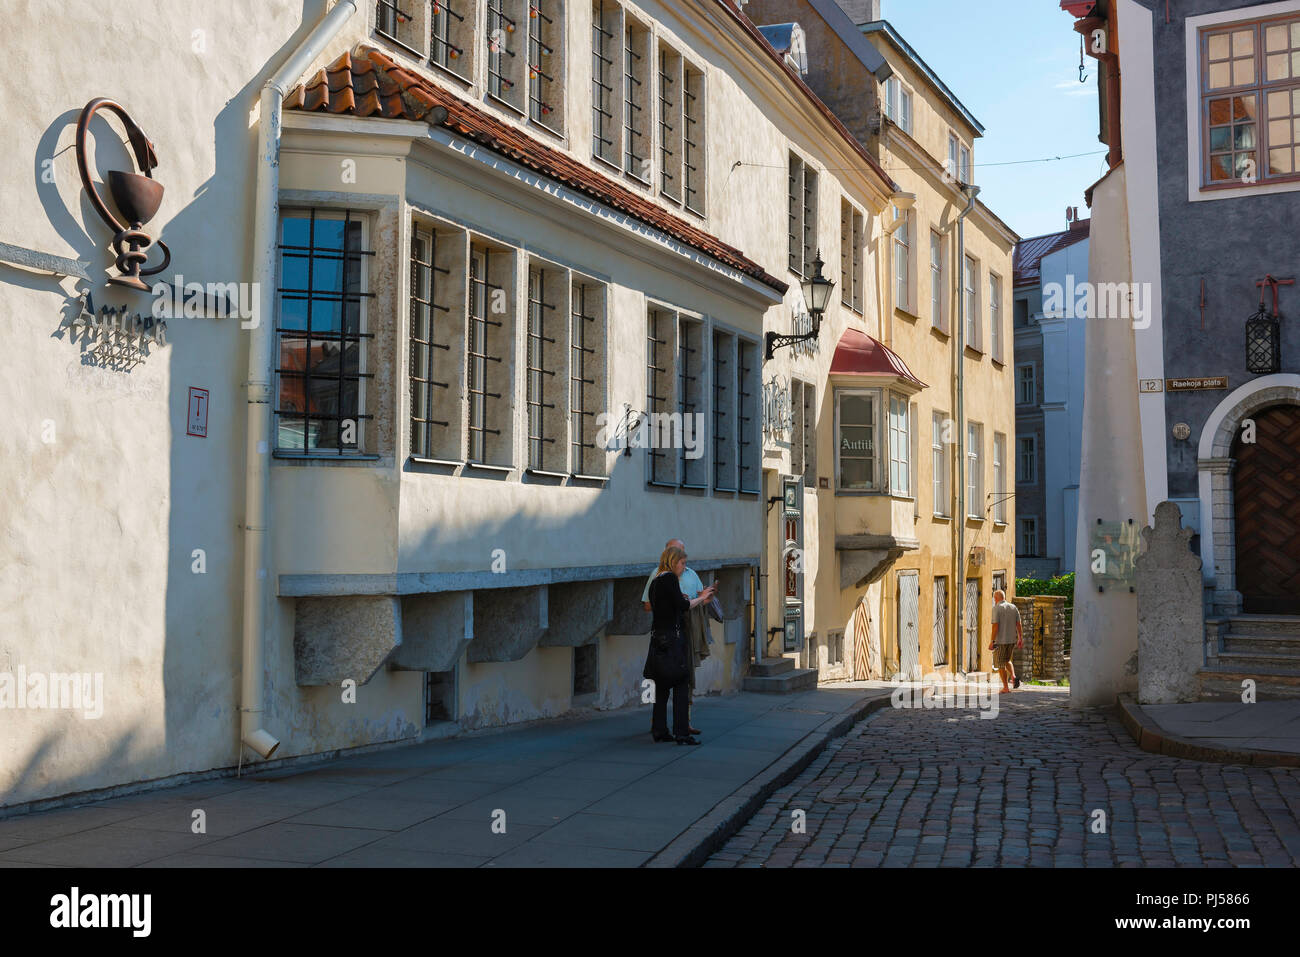 Tallinn street, view of two middle aged tourists standing outside the oldest pharmacy in Europe - the Apteek (1422) in Tallinn Old Town, Estonia. Stock Photo